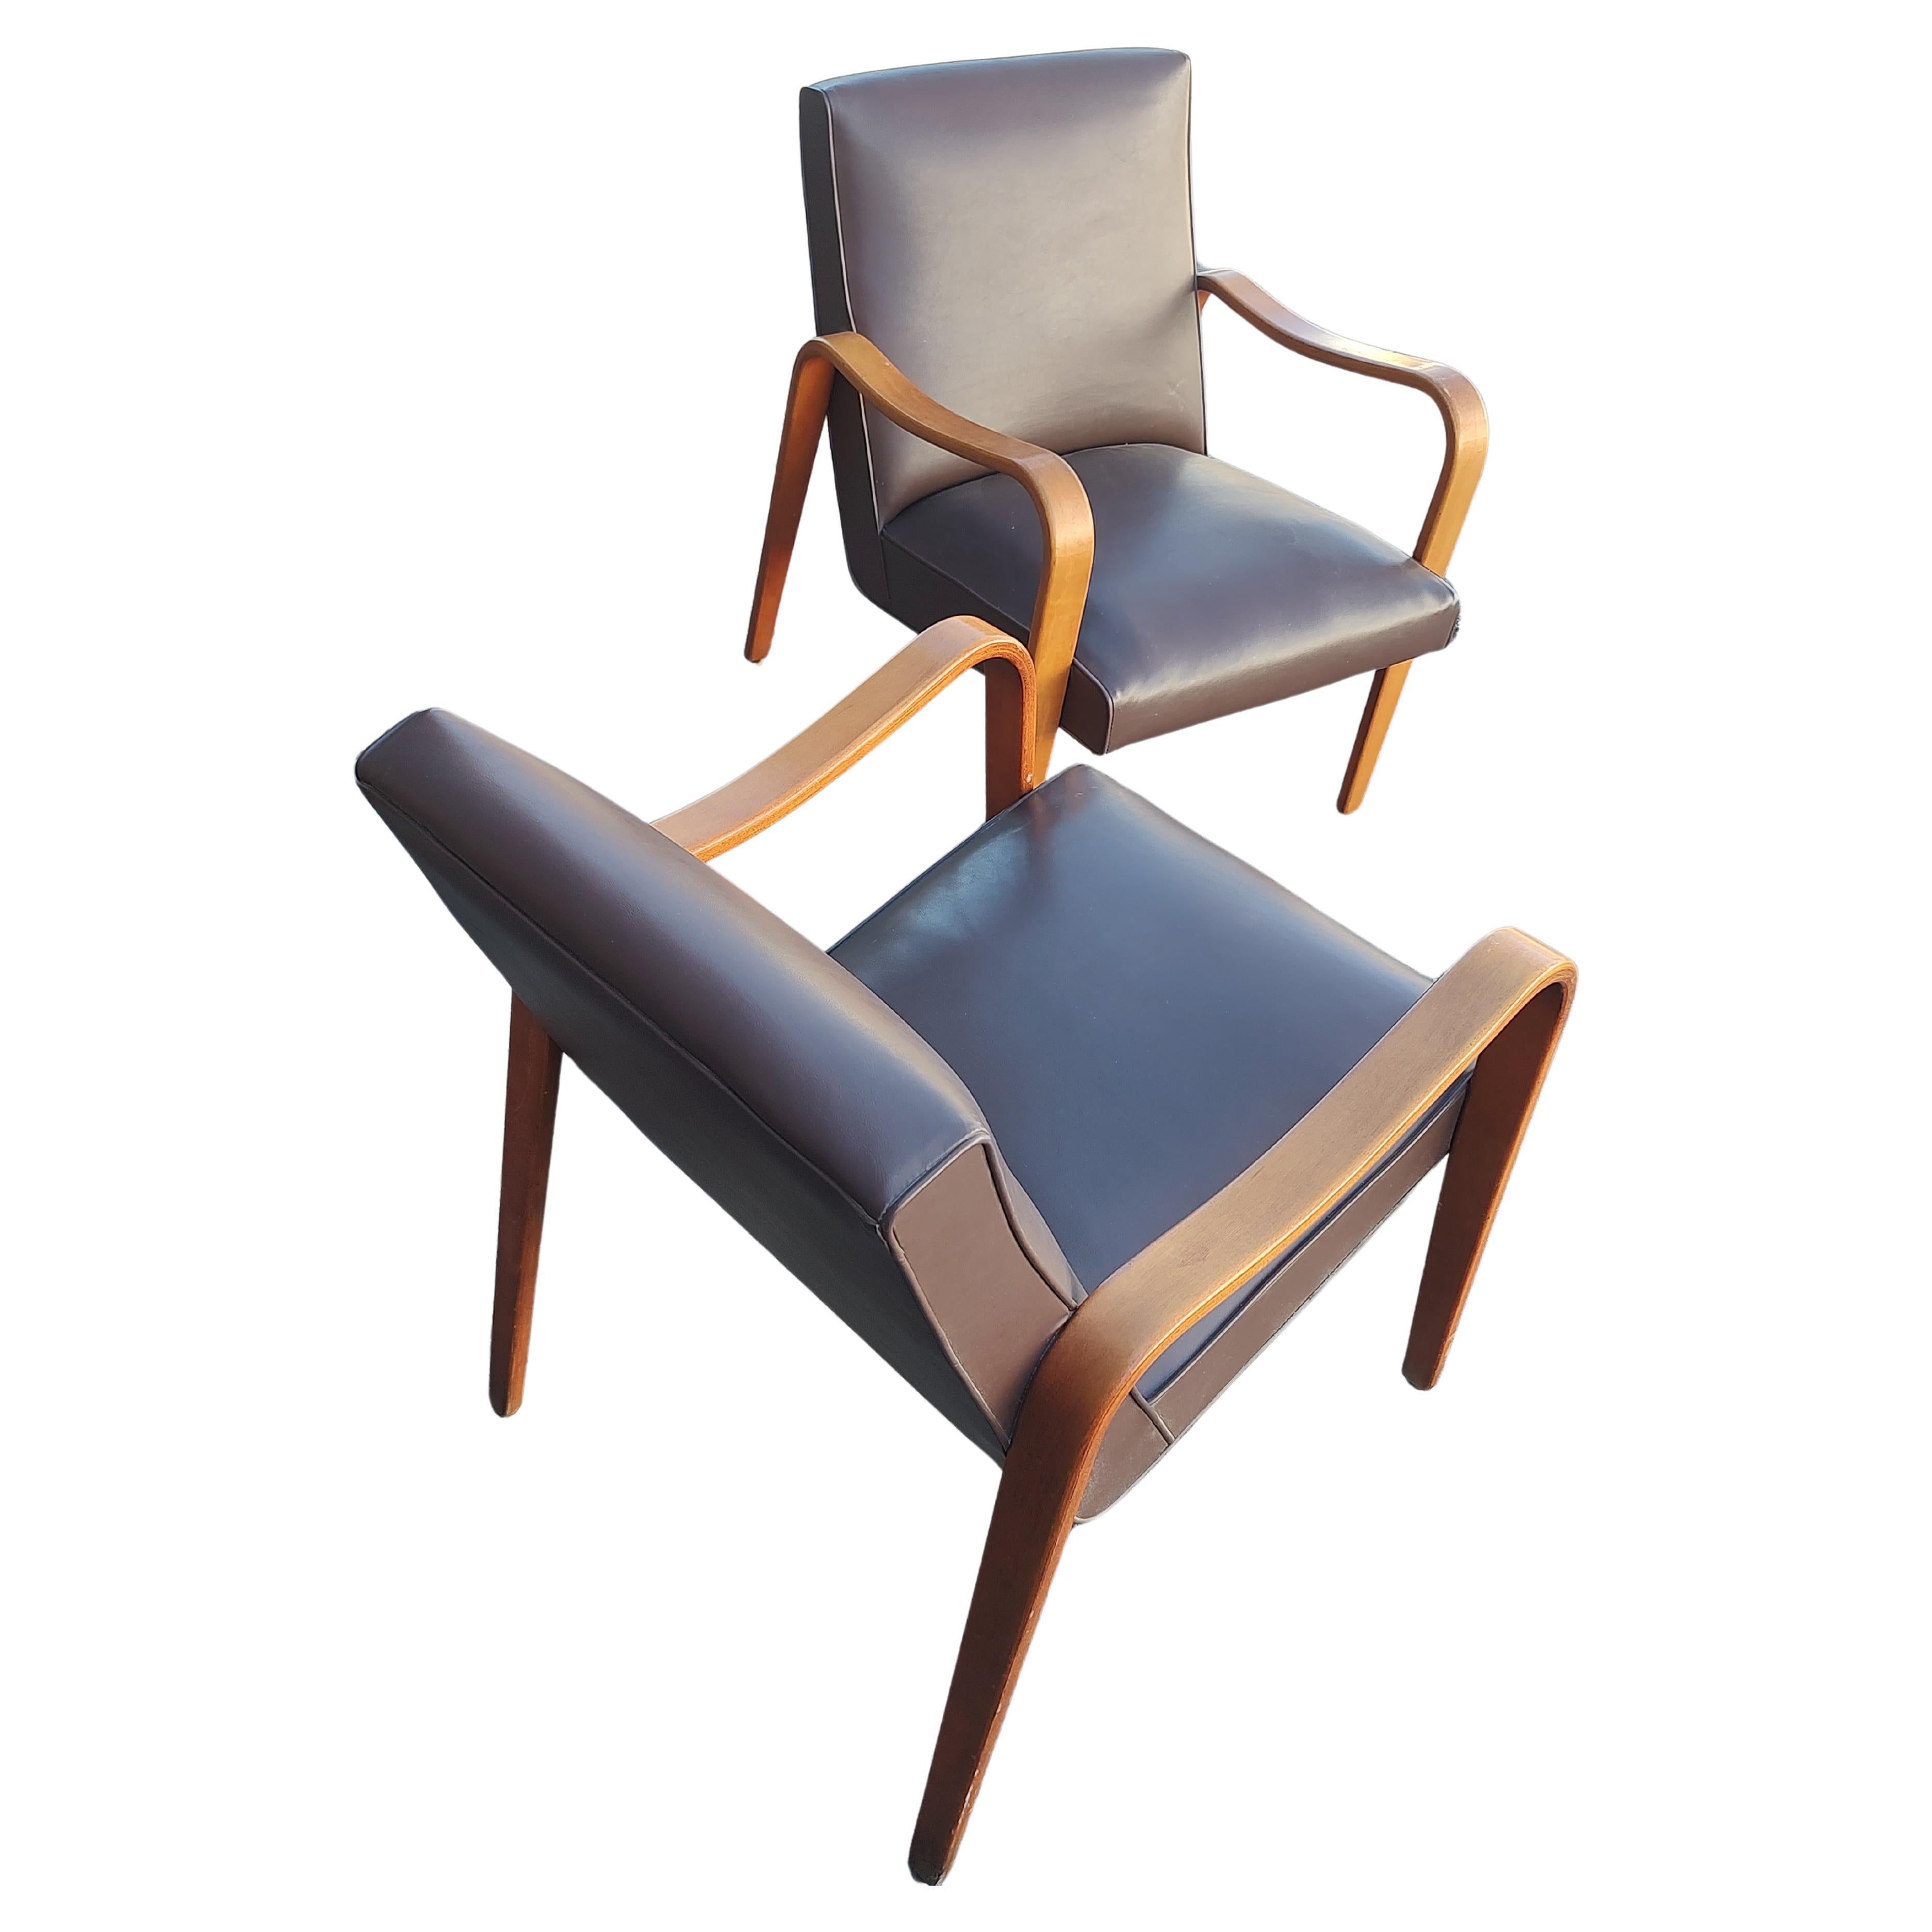 Mid-20th Century Mid Century Modern Sculptural Bent Arm Lounge Chairs in Birch by Thonet For Sale